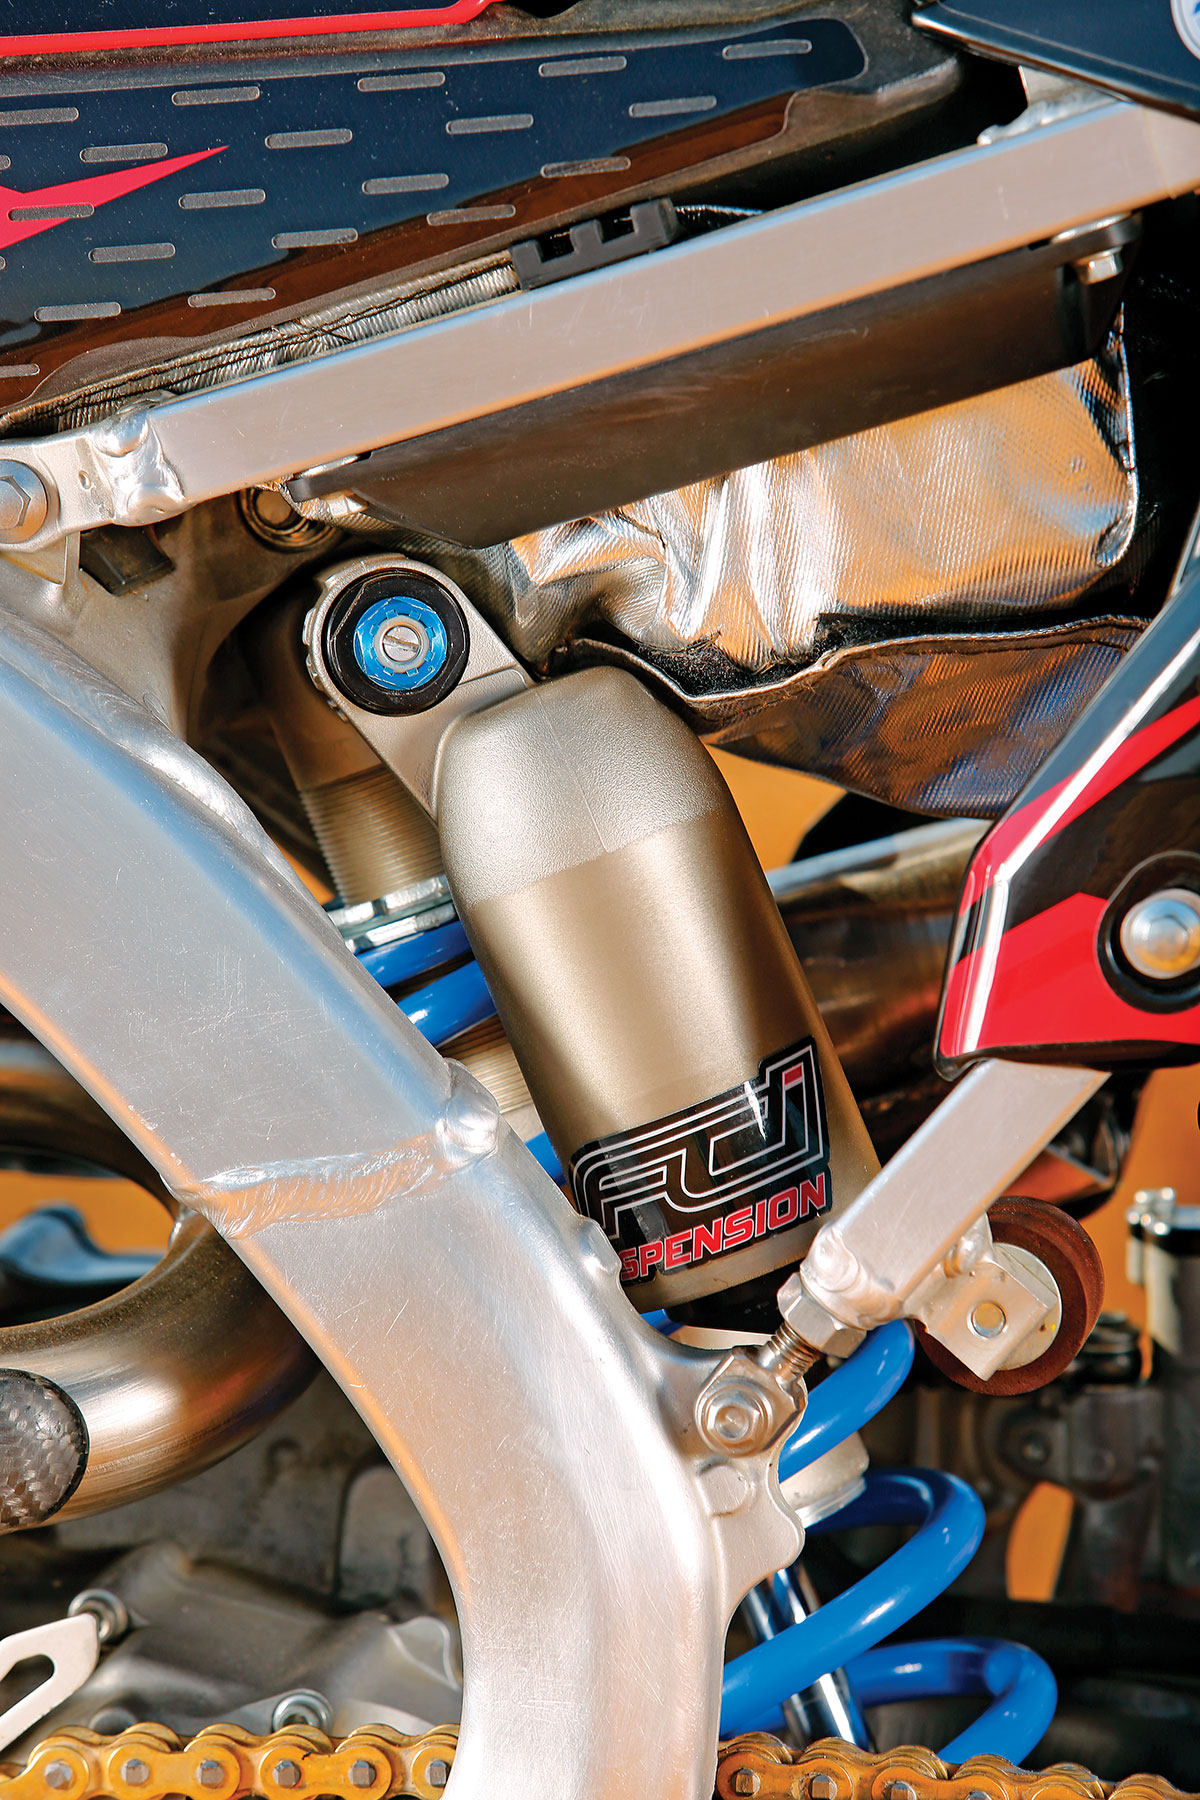 The FTI Racing-built Kayaba shock was put to the test. It was plush and held up well for our test riders.